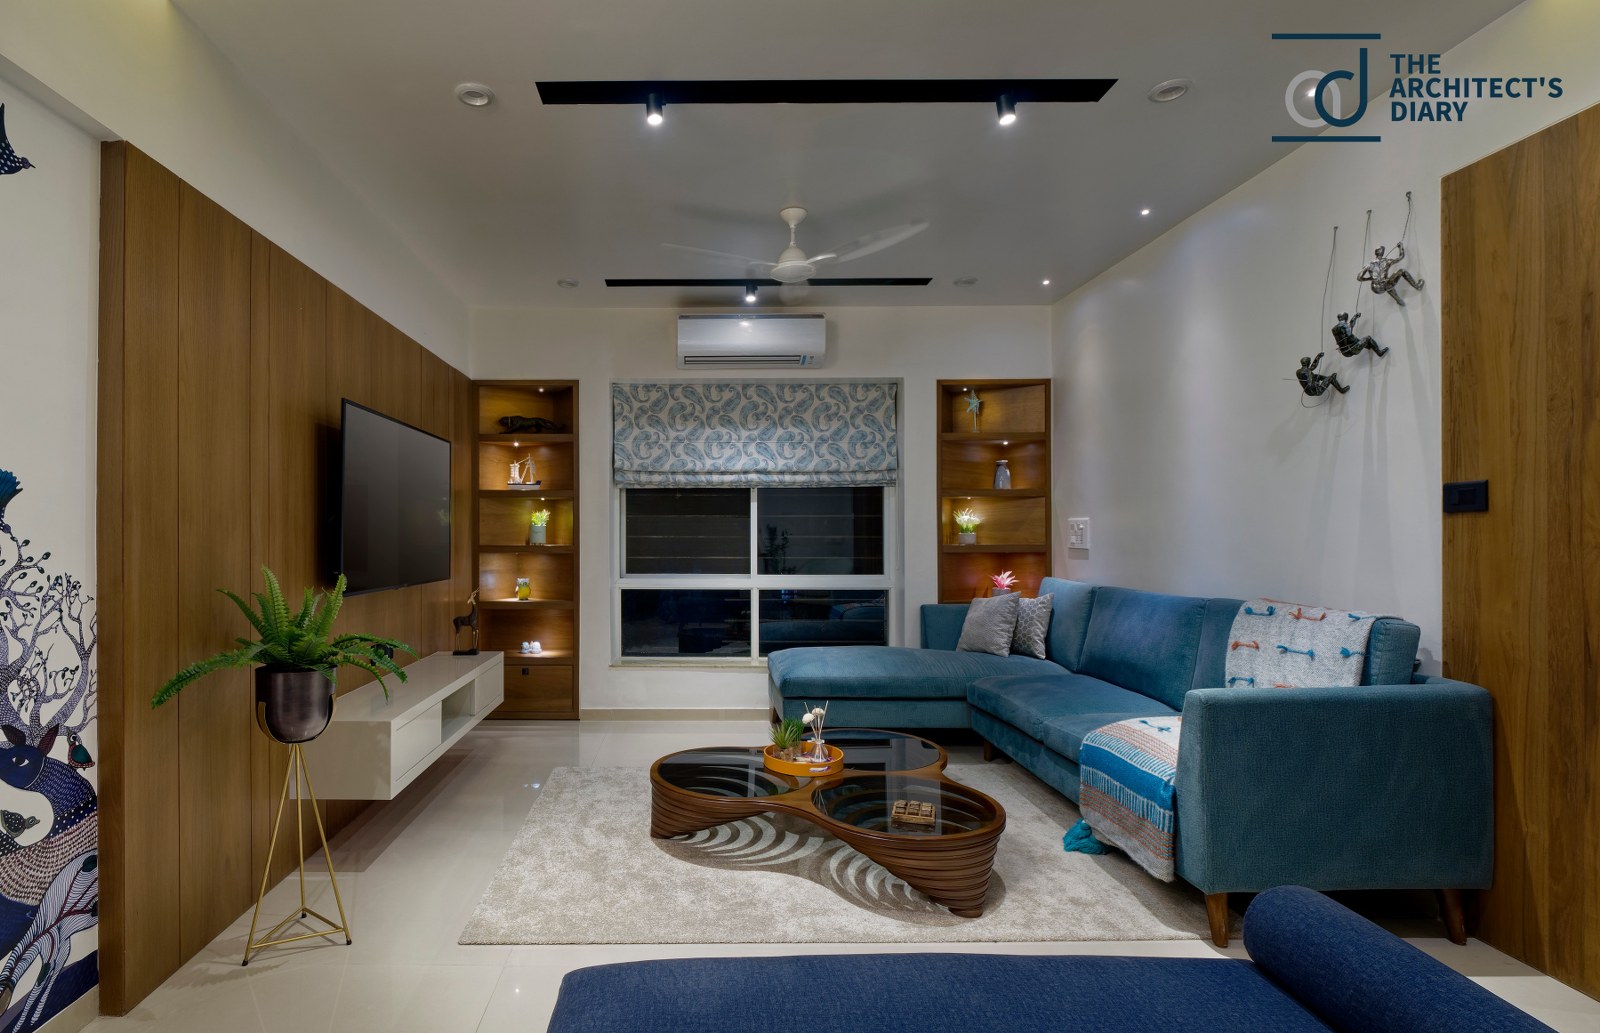 The Apartment Interior Bound By Poise And Gracefulness | Shivam Bagdia ...